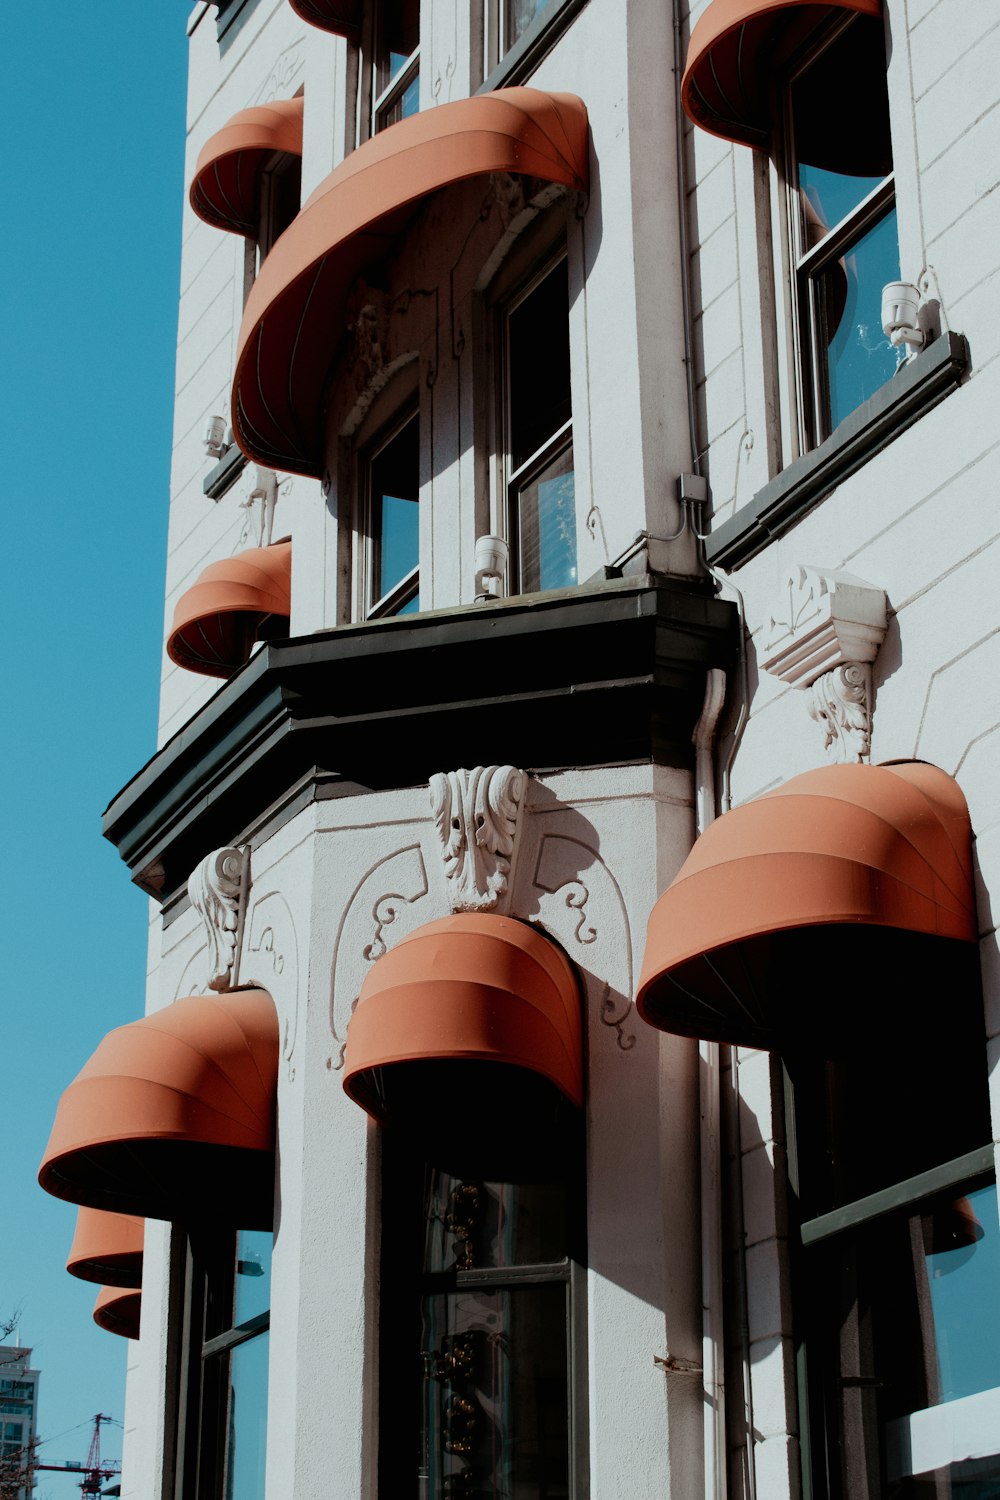 a tall building with orange awnings on the side of it